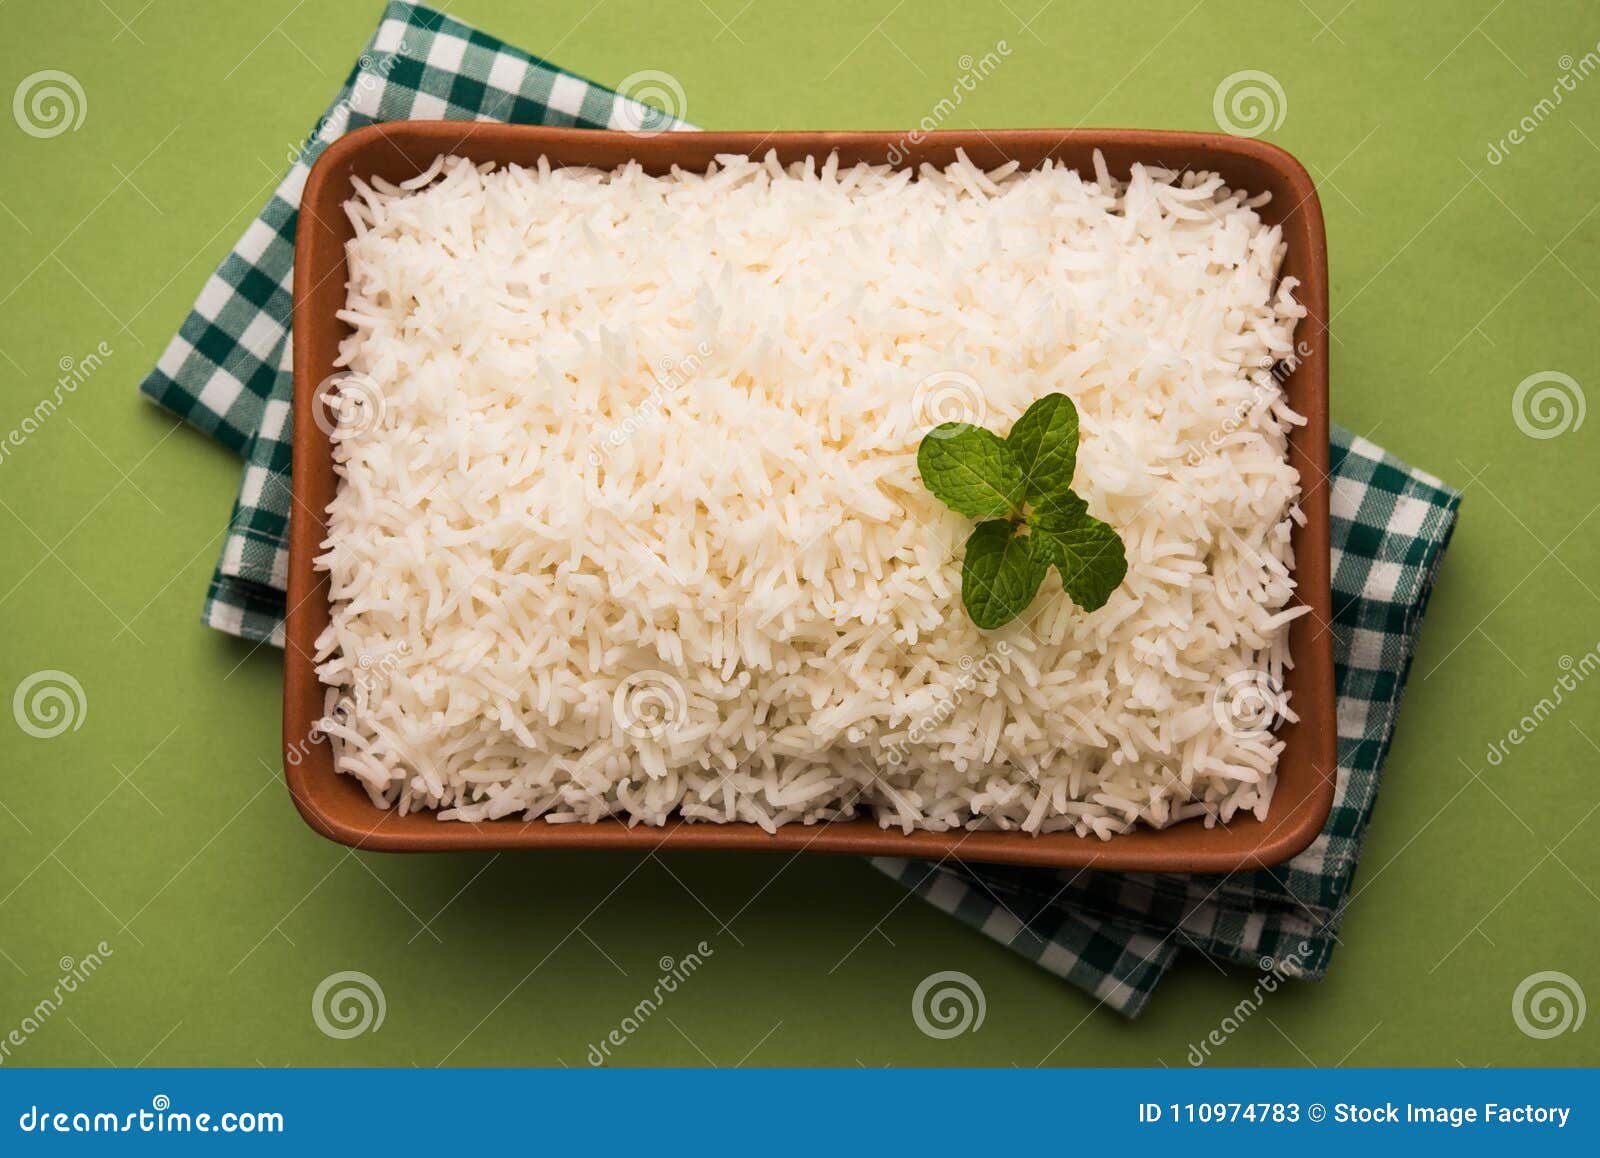 cooked plain white basmati rice in terracotta bowl, selective focus